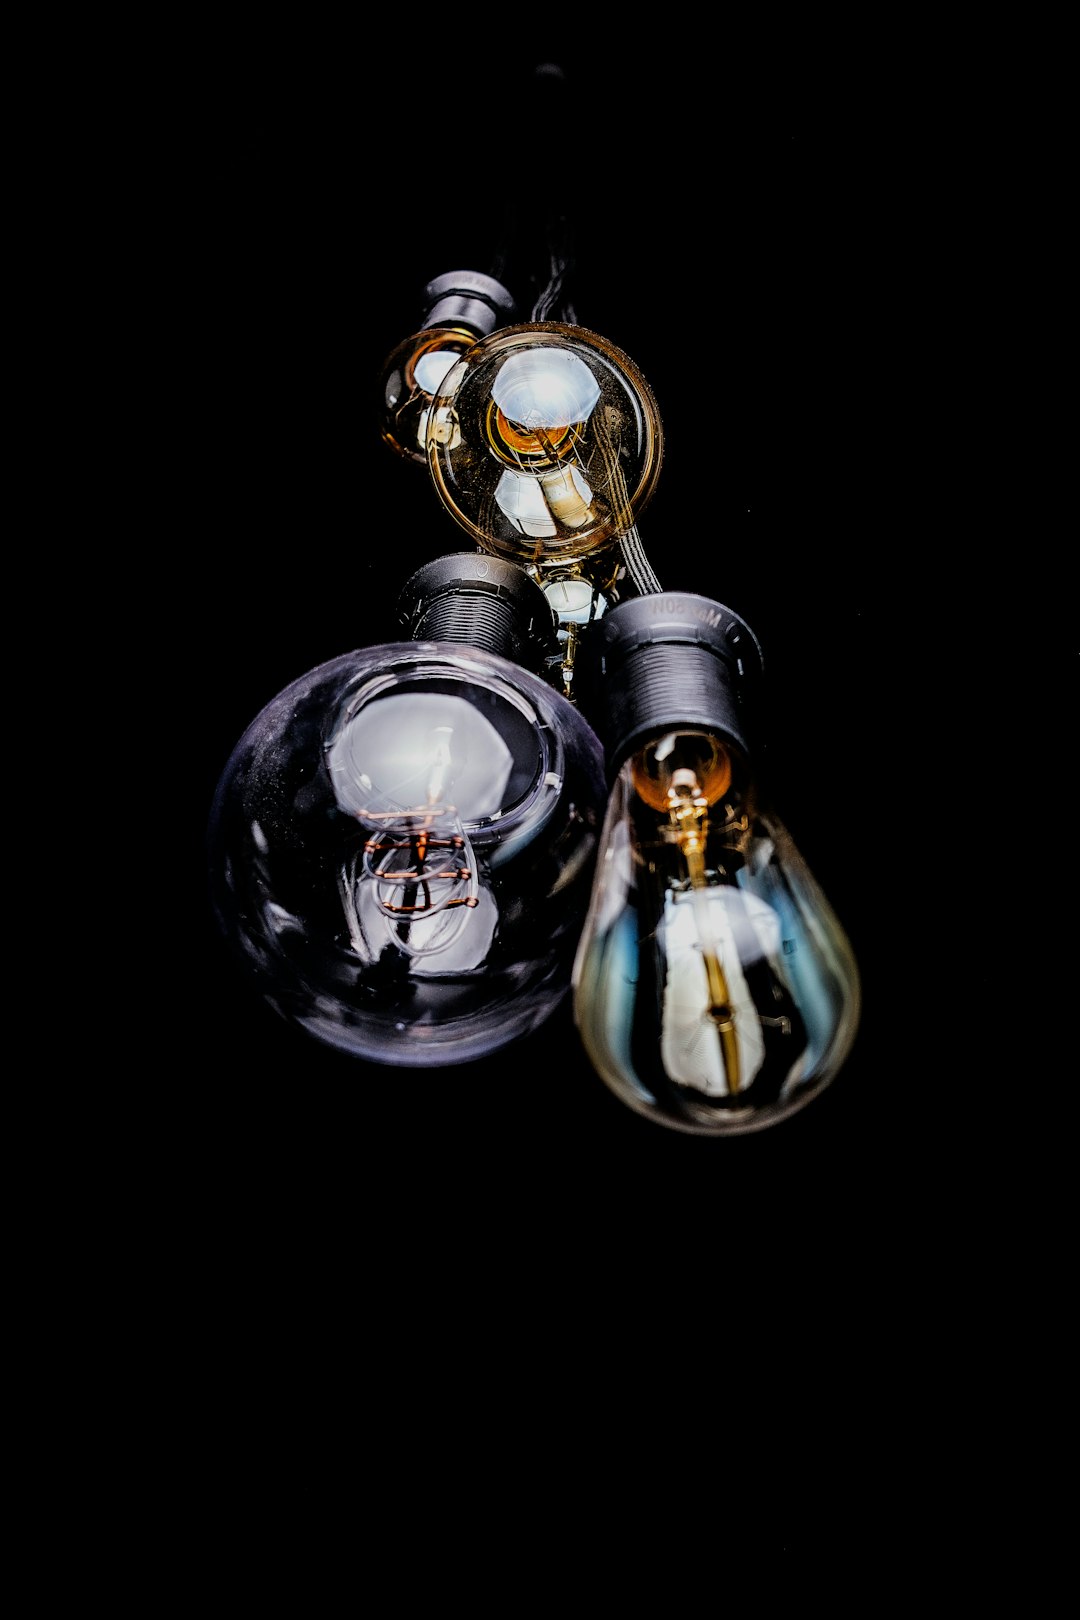 A close-up of the light bulbs against the black background in Cascais.